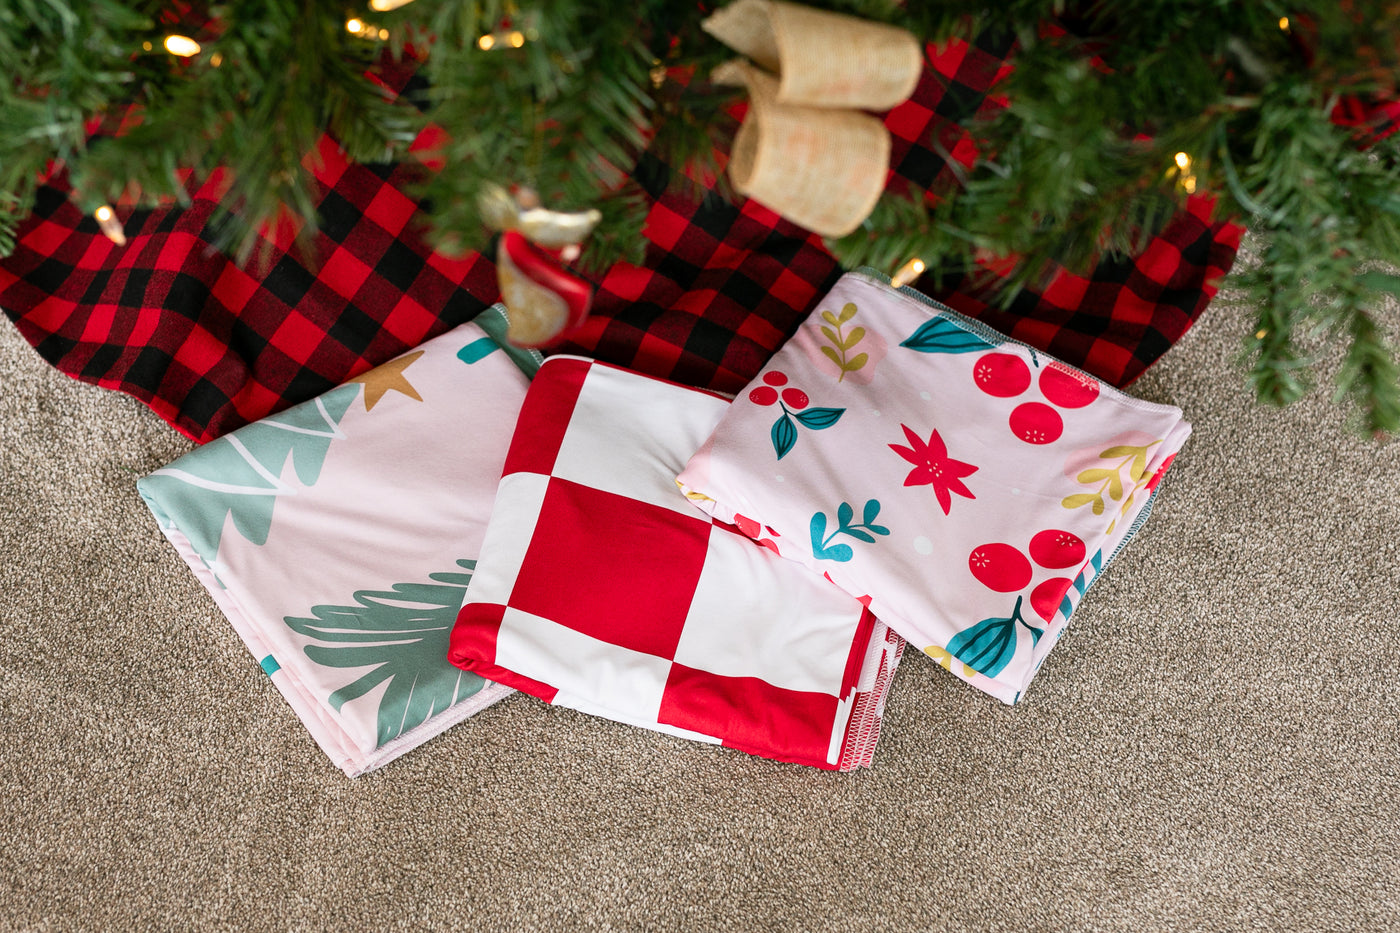 Pink Christmas Tree 2-Sided Swaddle